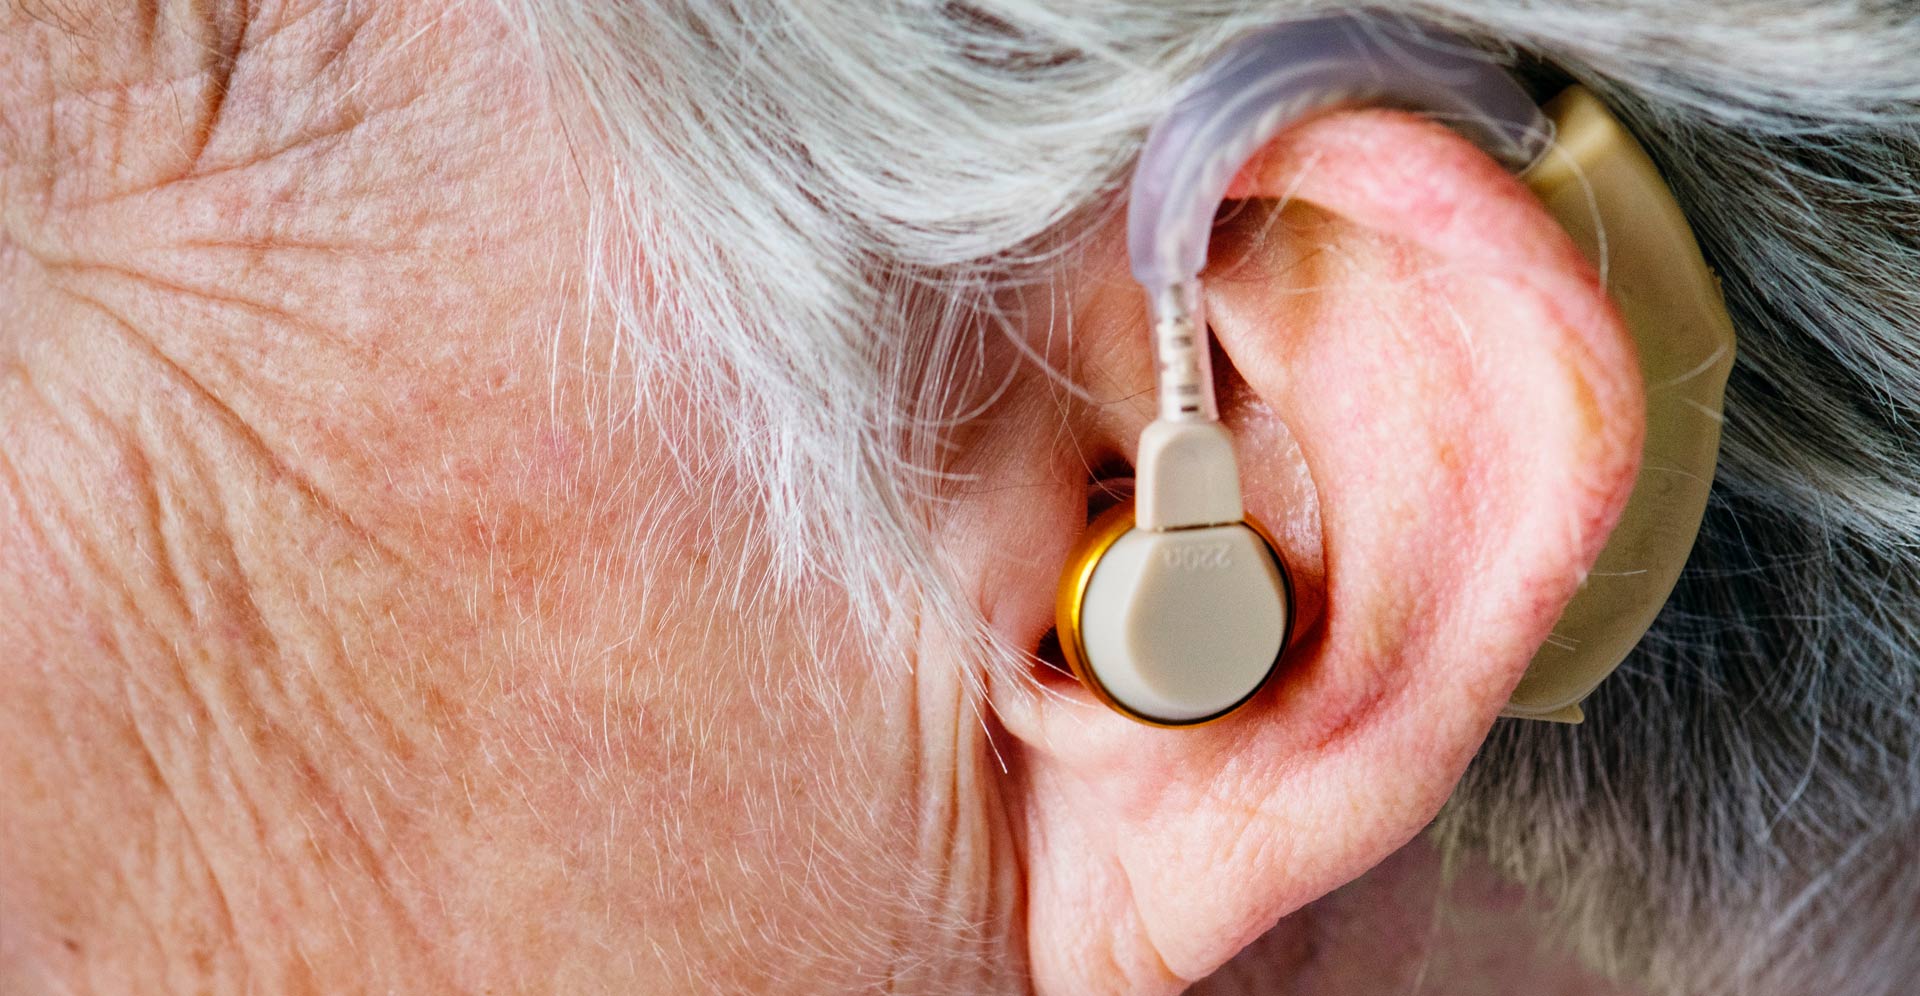 5 Reasons People Don’t Wear their Hearing Aids